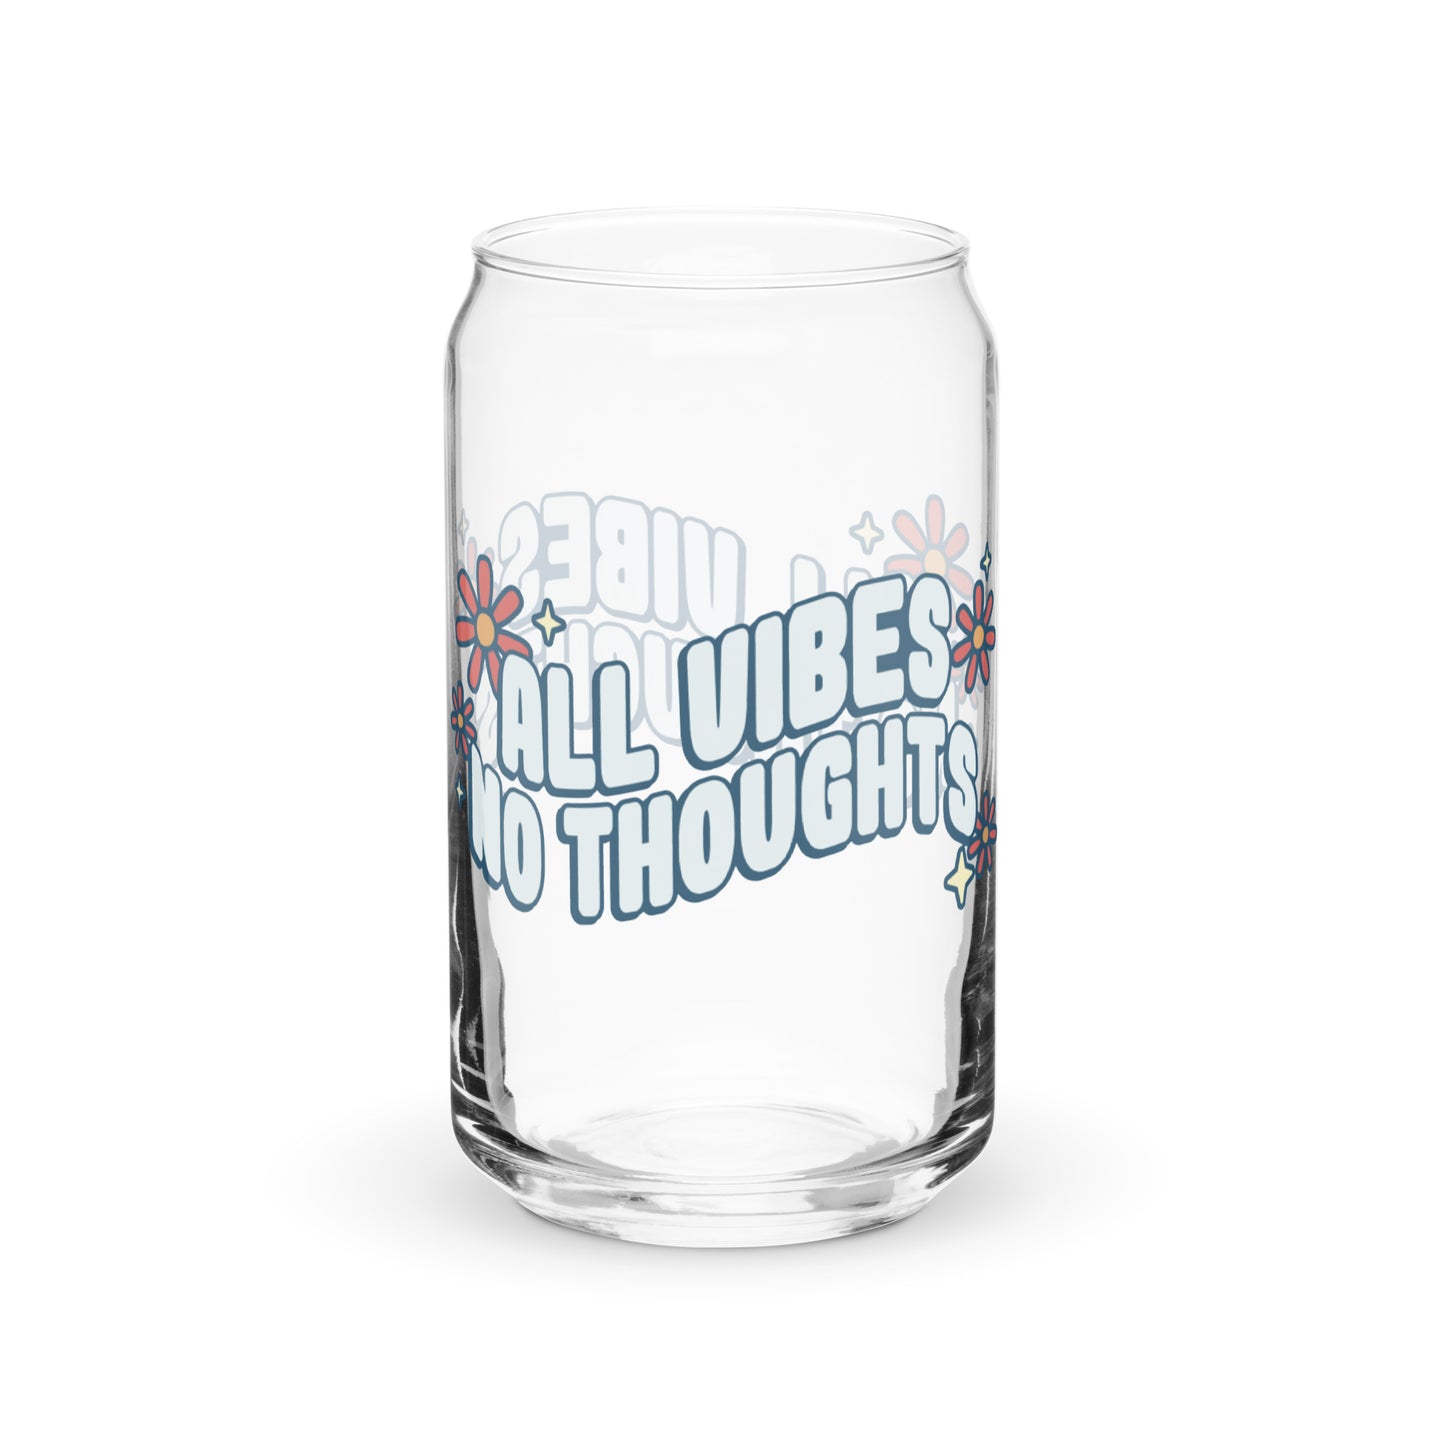 A can-shaped glass featuring text that reads "All vibes no thoughts". Around the text are pink flowers and pale yellow sparkles.